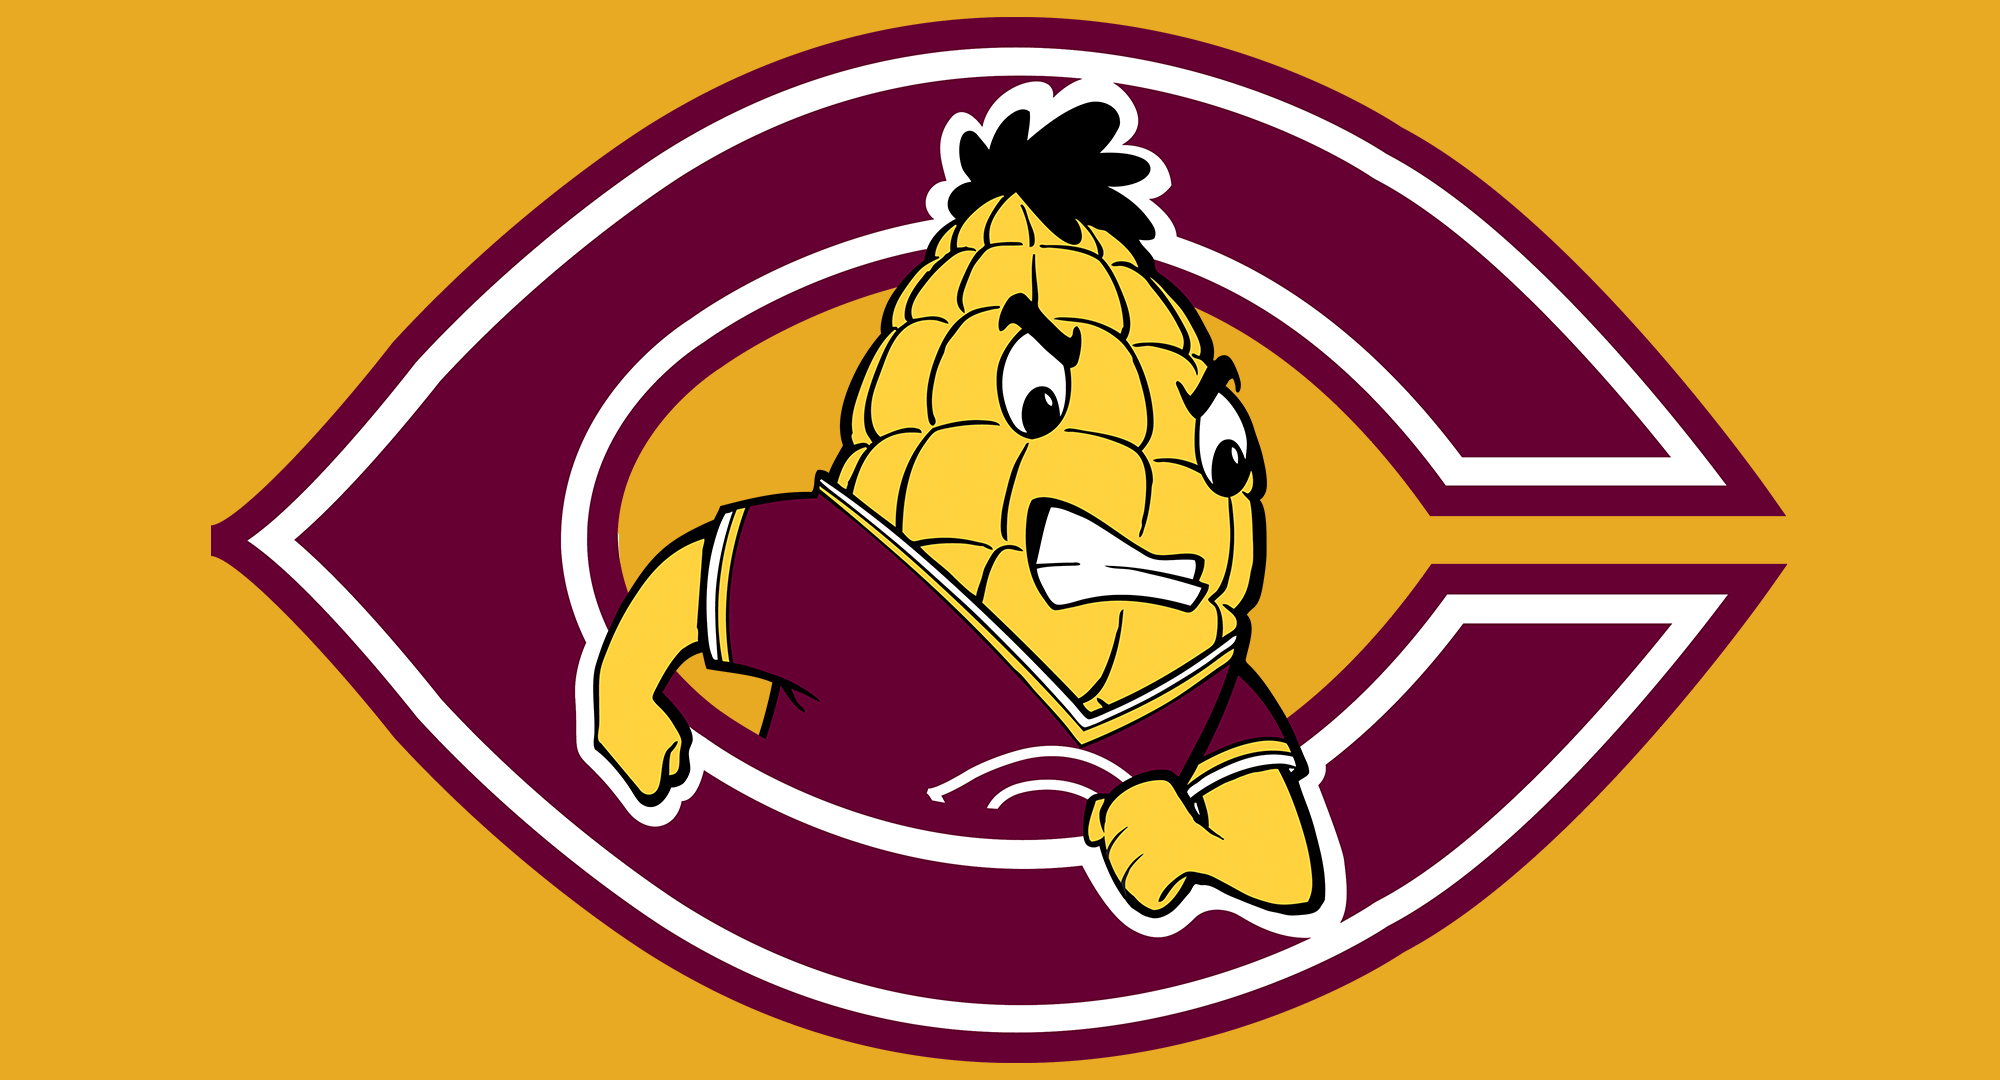 Be sure to check back on Dec. 27 when Cobber Athletics unveils their newest sport offering.&nbsp;